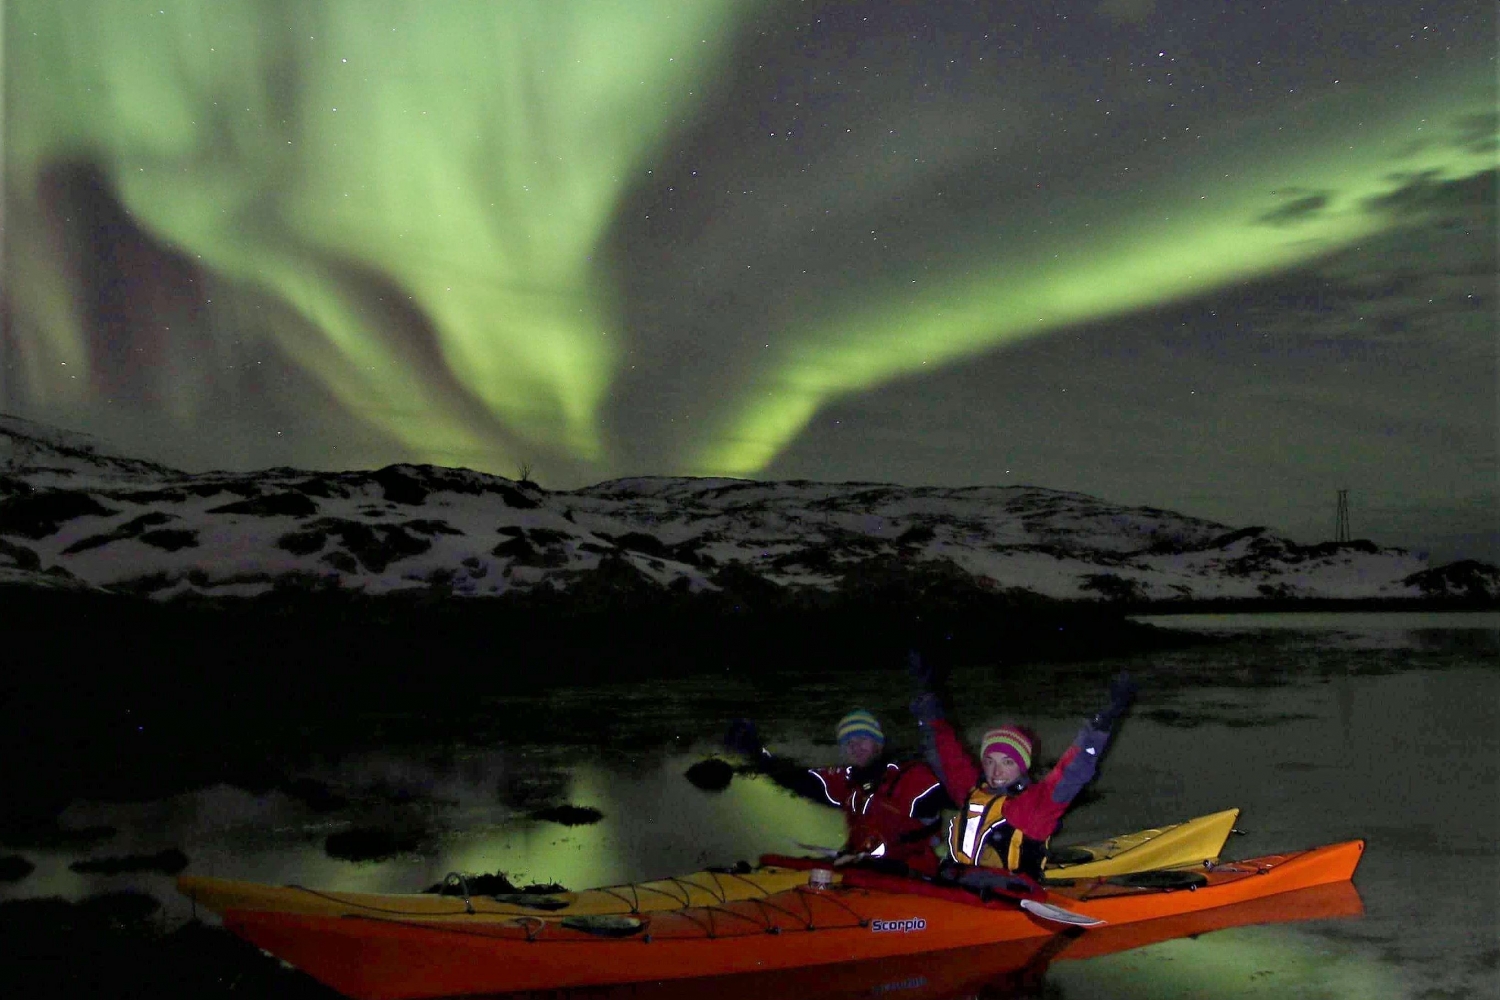 Two days Arctic Camp with Winter Kayaking